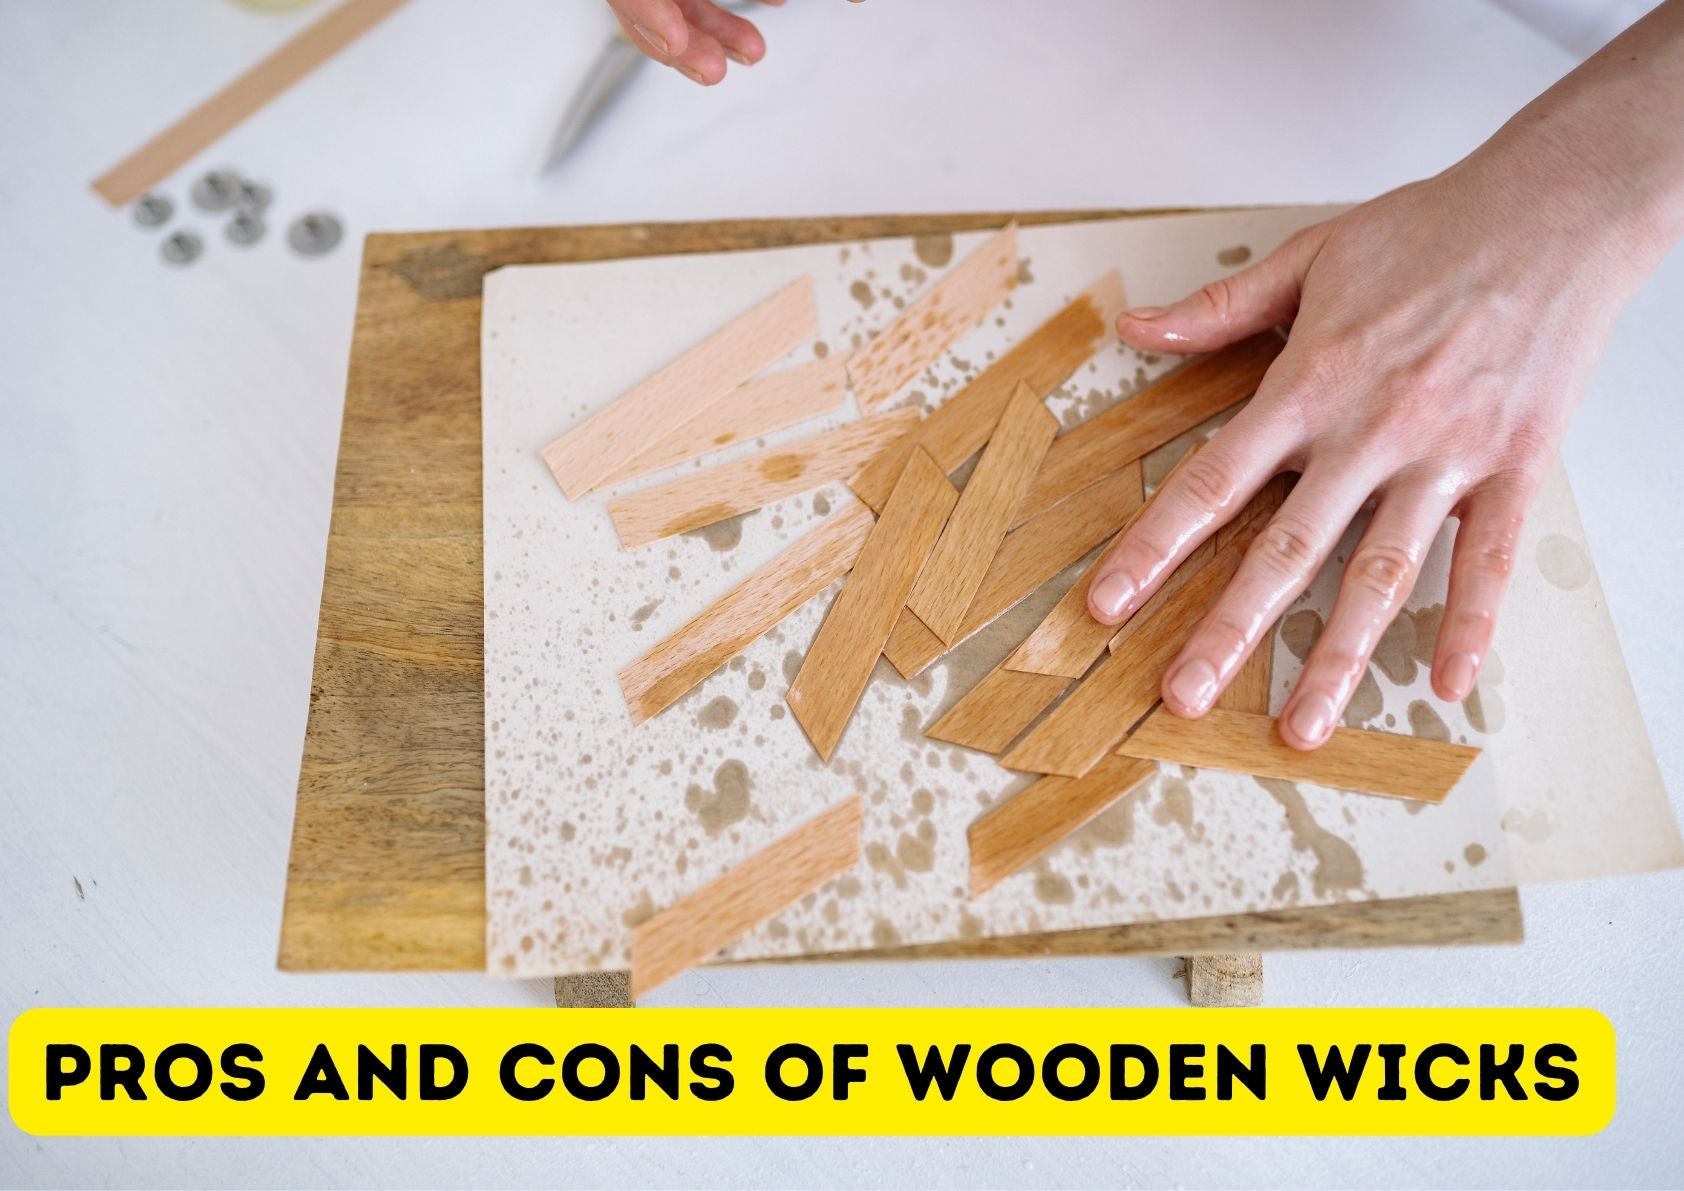 Wood Wick Vs Cotton Wick For Candle Making - Which One is Better? – VedaOils